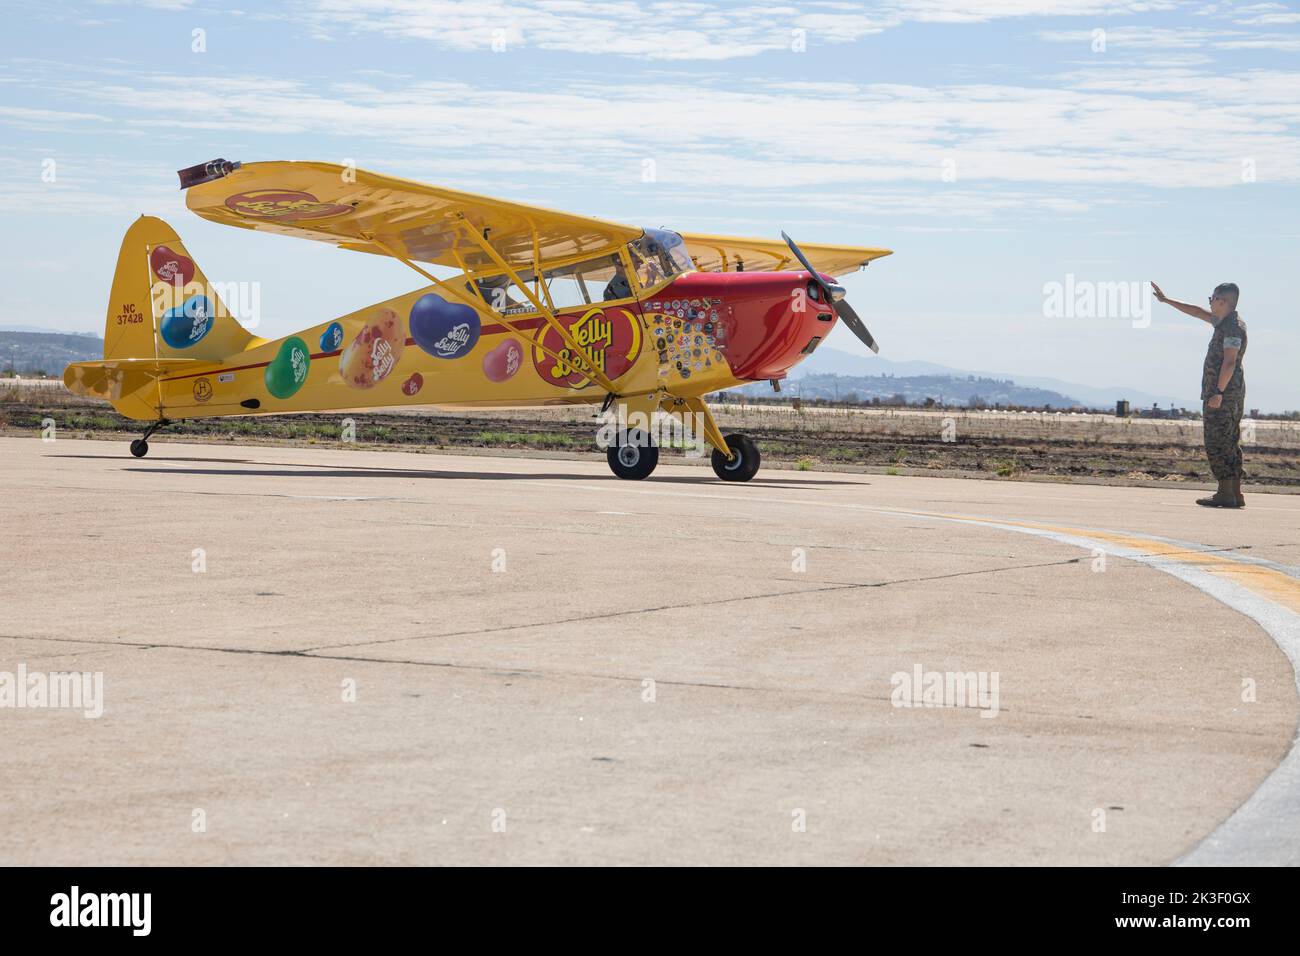 Kent Pietsch, piloting his Interstate Cadet, comes to a stop after performing aerobatics during the 2022 Miramar Air Show at MCAS Miramar, September 24, 2022 in San Diego, California. Stock Photo